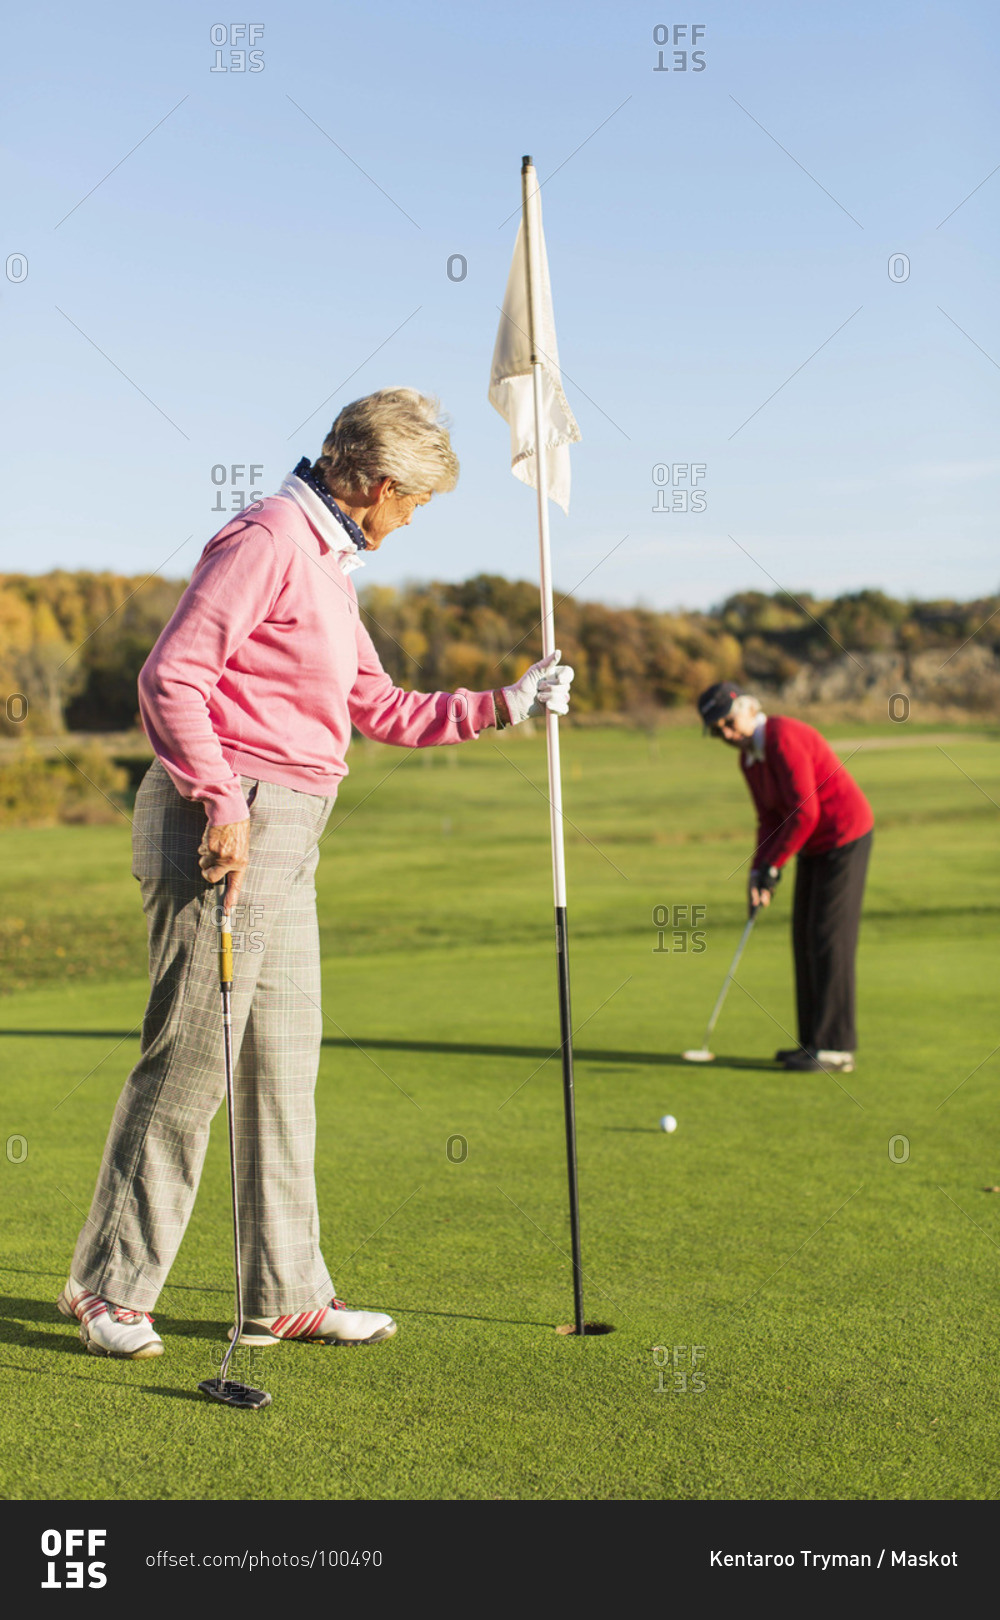 Senior woman putting while friend holding flag on golf course